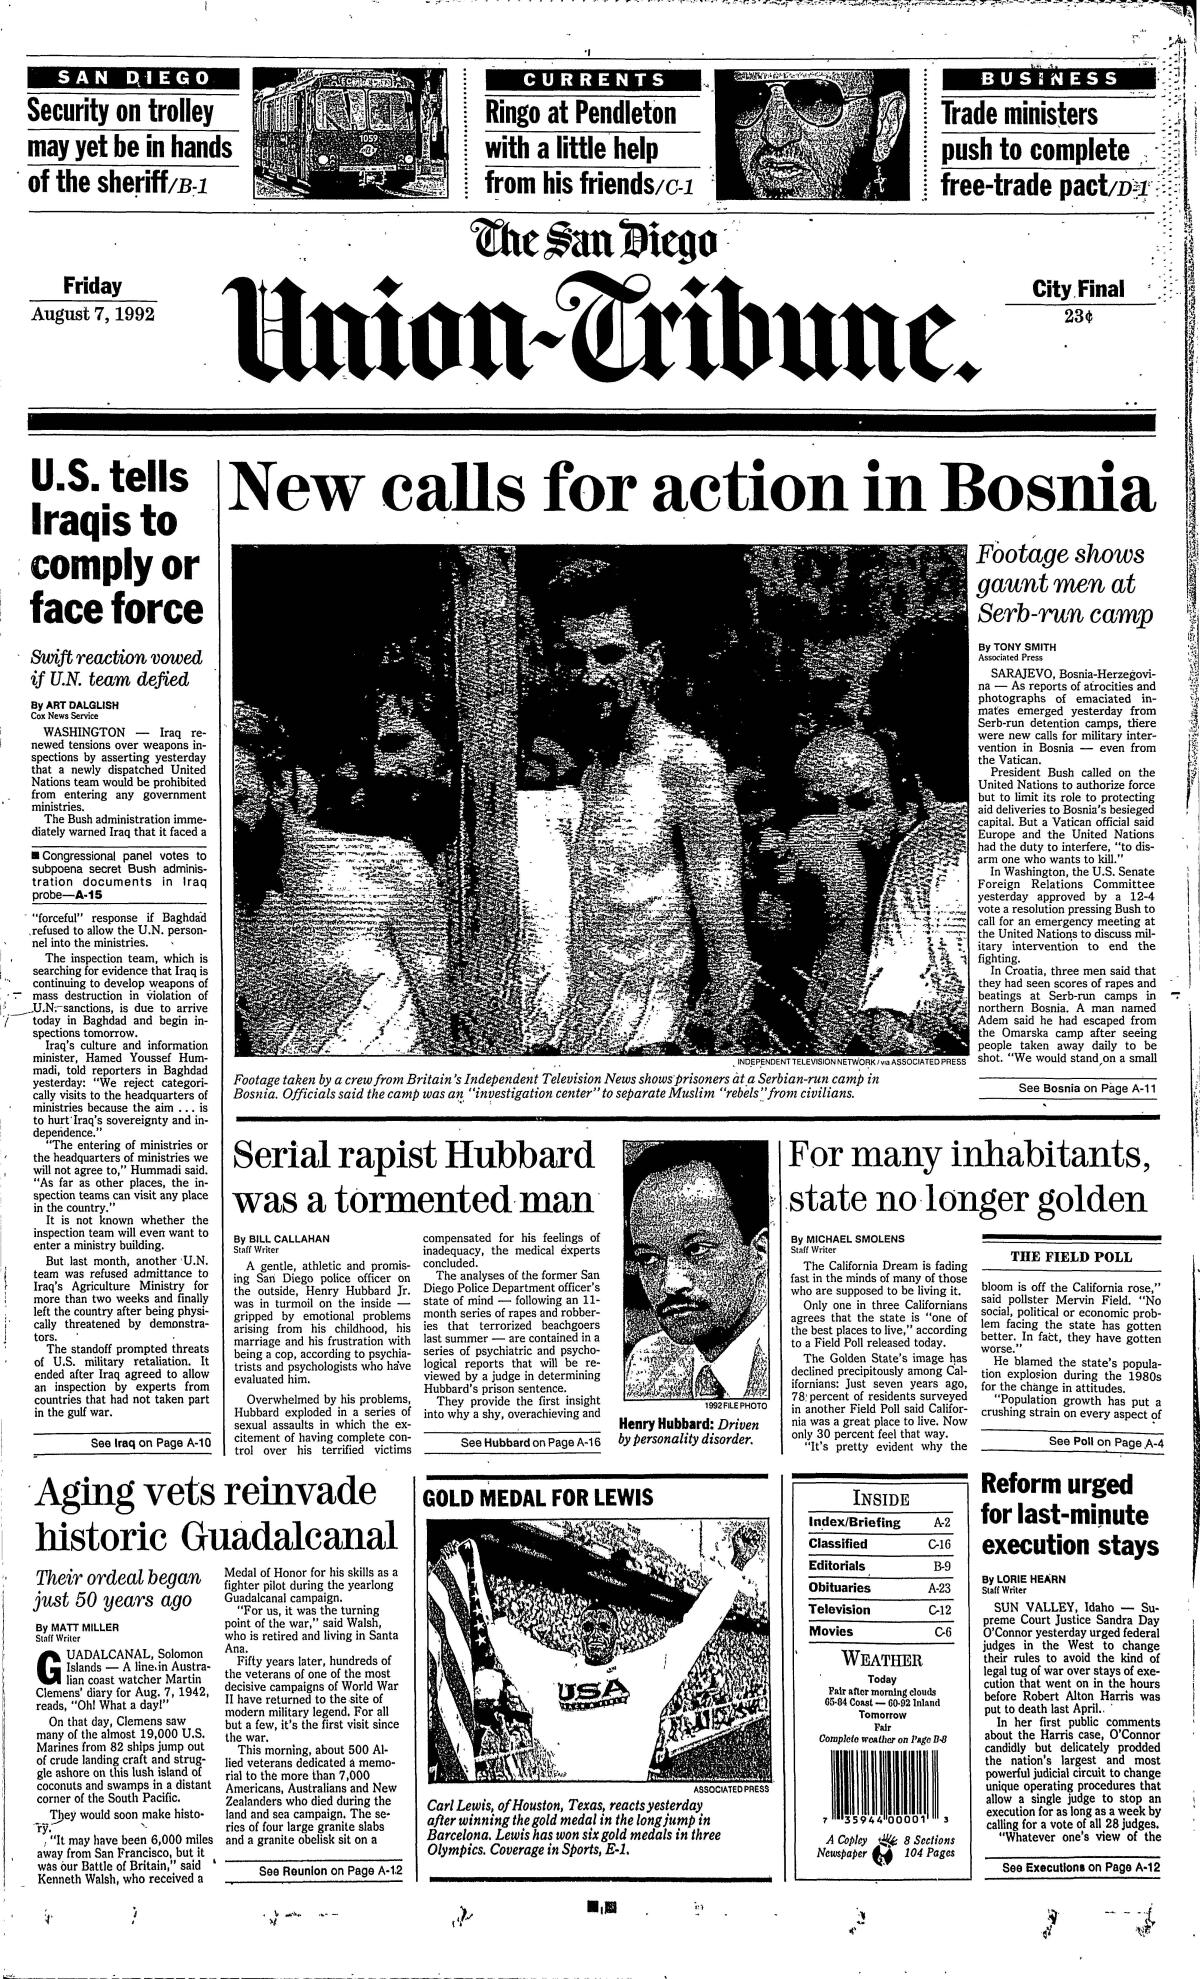 Front page of The San Diego Union-Tribune, Friday, Aug. 7, 1992.